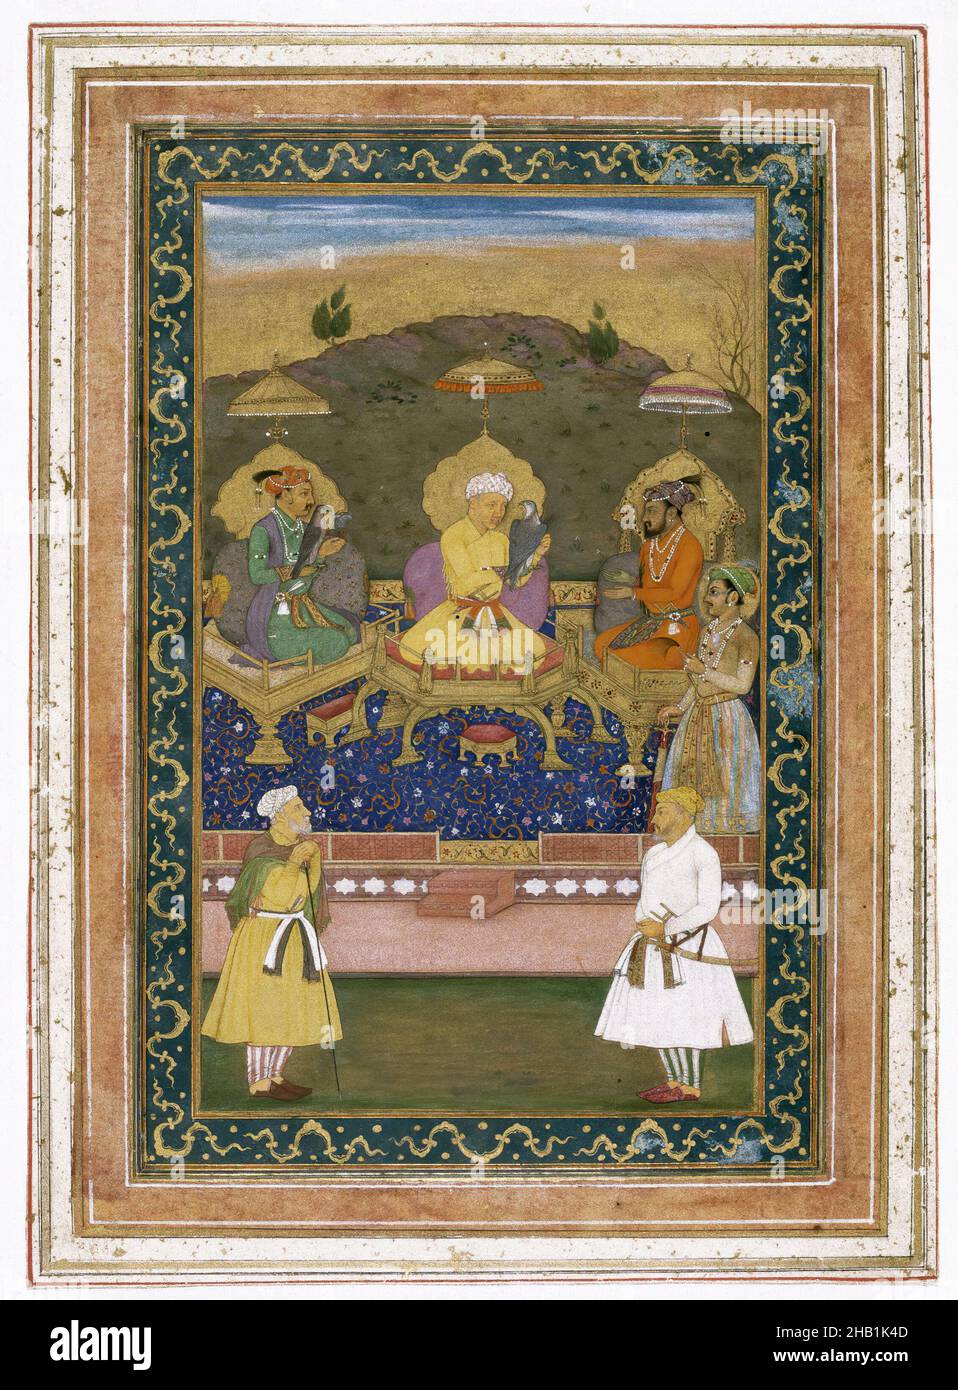 The Emperors Akbar, Jahangir, and Shah Jahan with Their Ministers and Prince Dara Shikoh, Chitaraman, Indian, Opaque watercolor and gold on paper, India, ca. 1630-1640, Mughal Dynasty, 22 x 32 in., 55.9 x 81.3 cm, bekar, court, dara, falcon, hunters, Indian art, painting, power, royal, rulers, shikoh Stock Photo